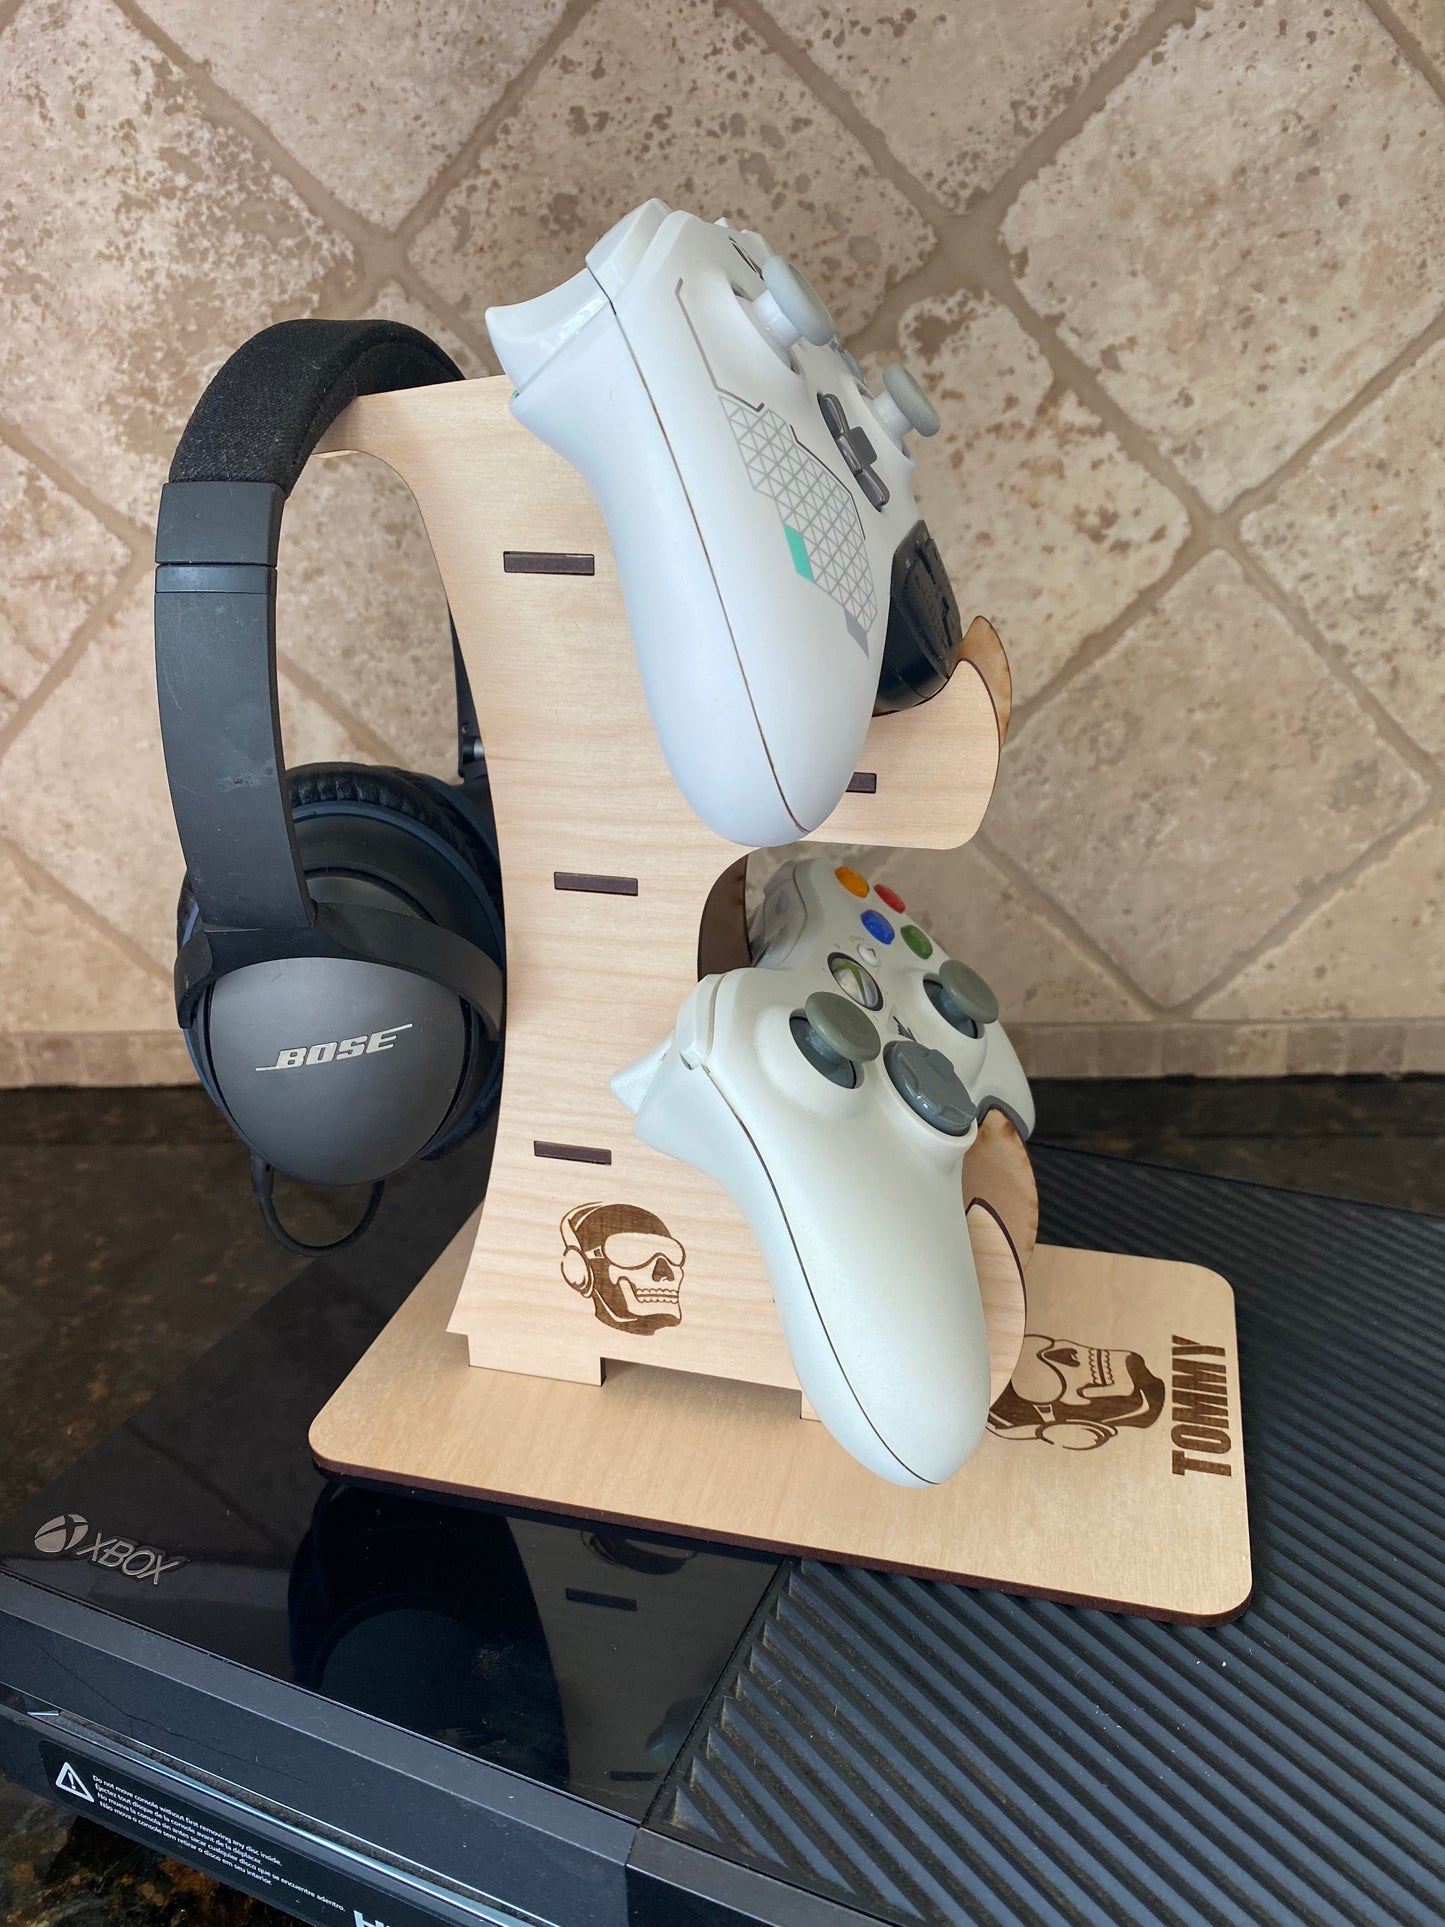 Gaming stand